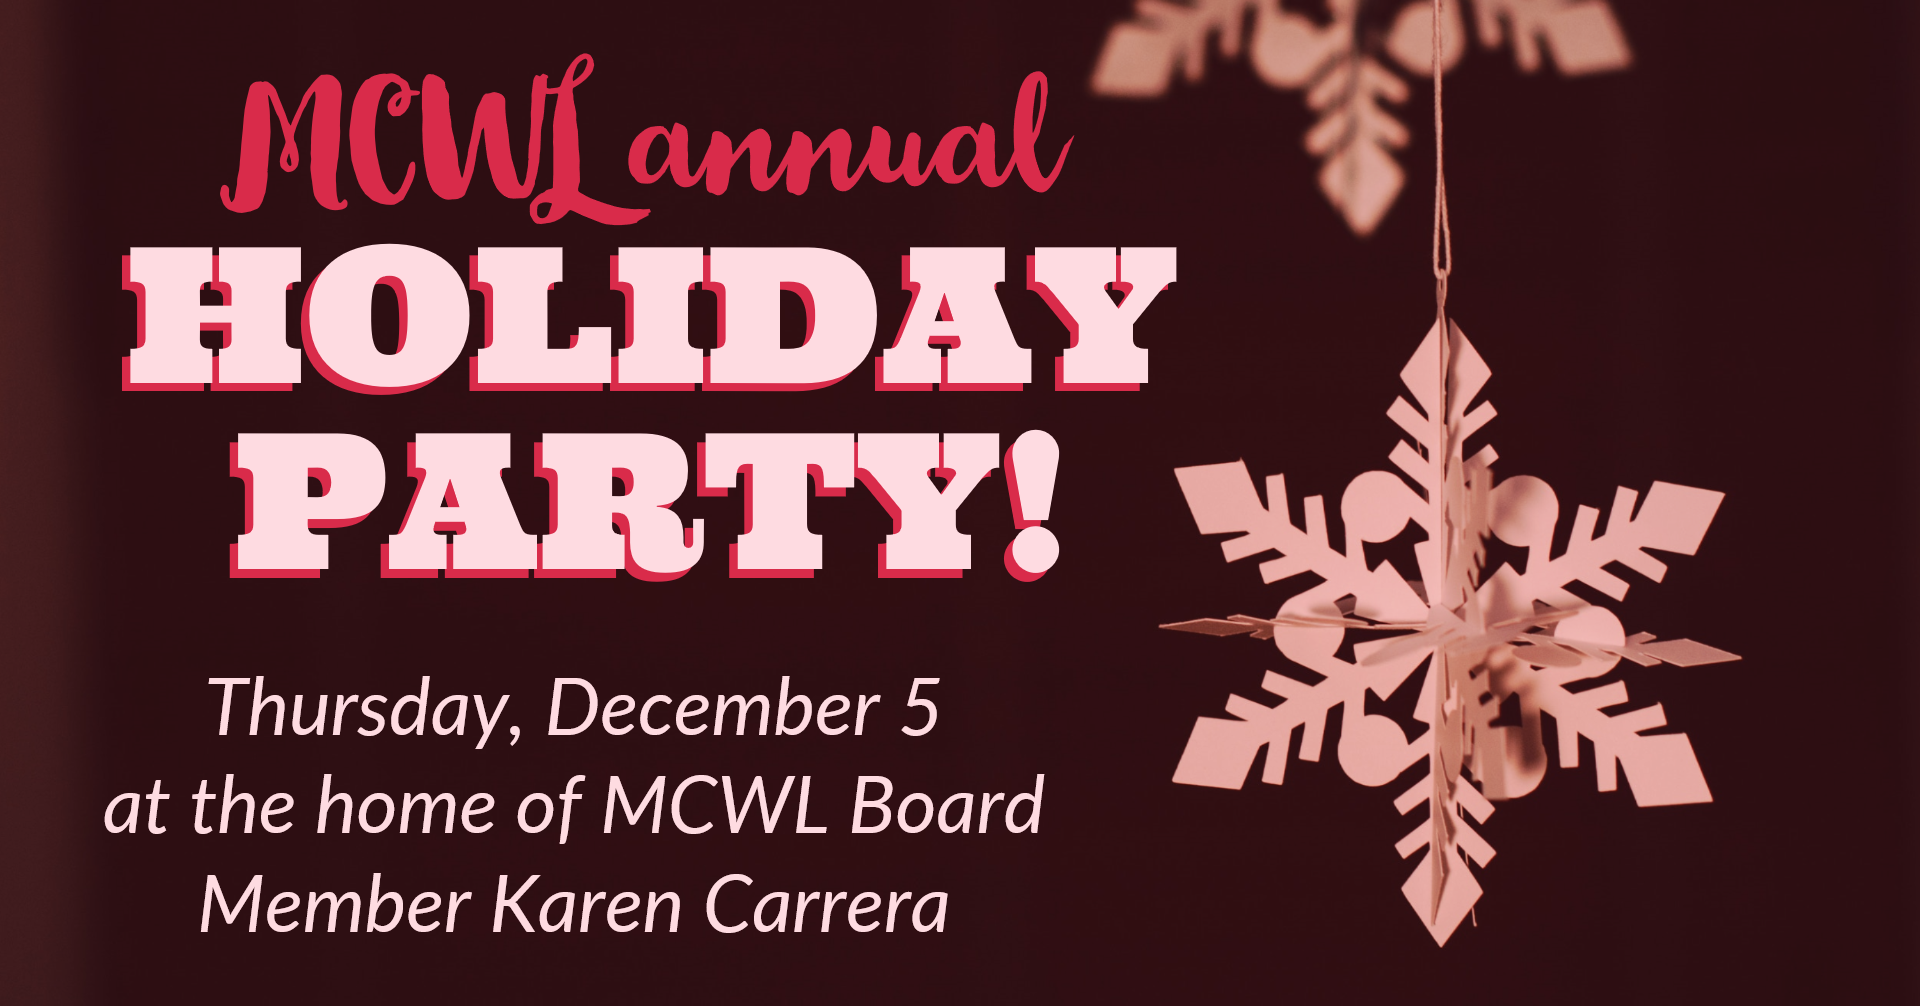 *MCWL 2019 Holiday Party